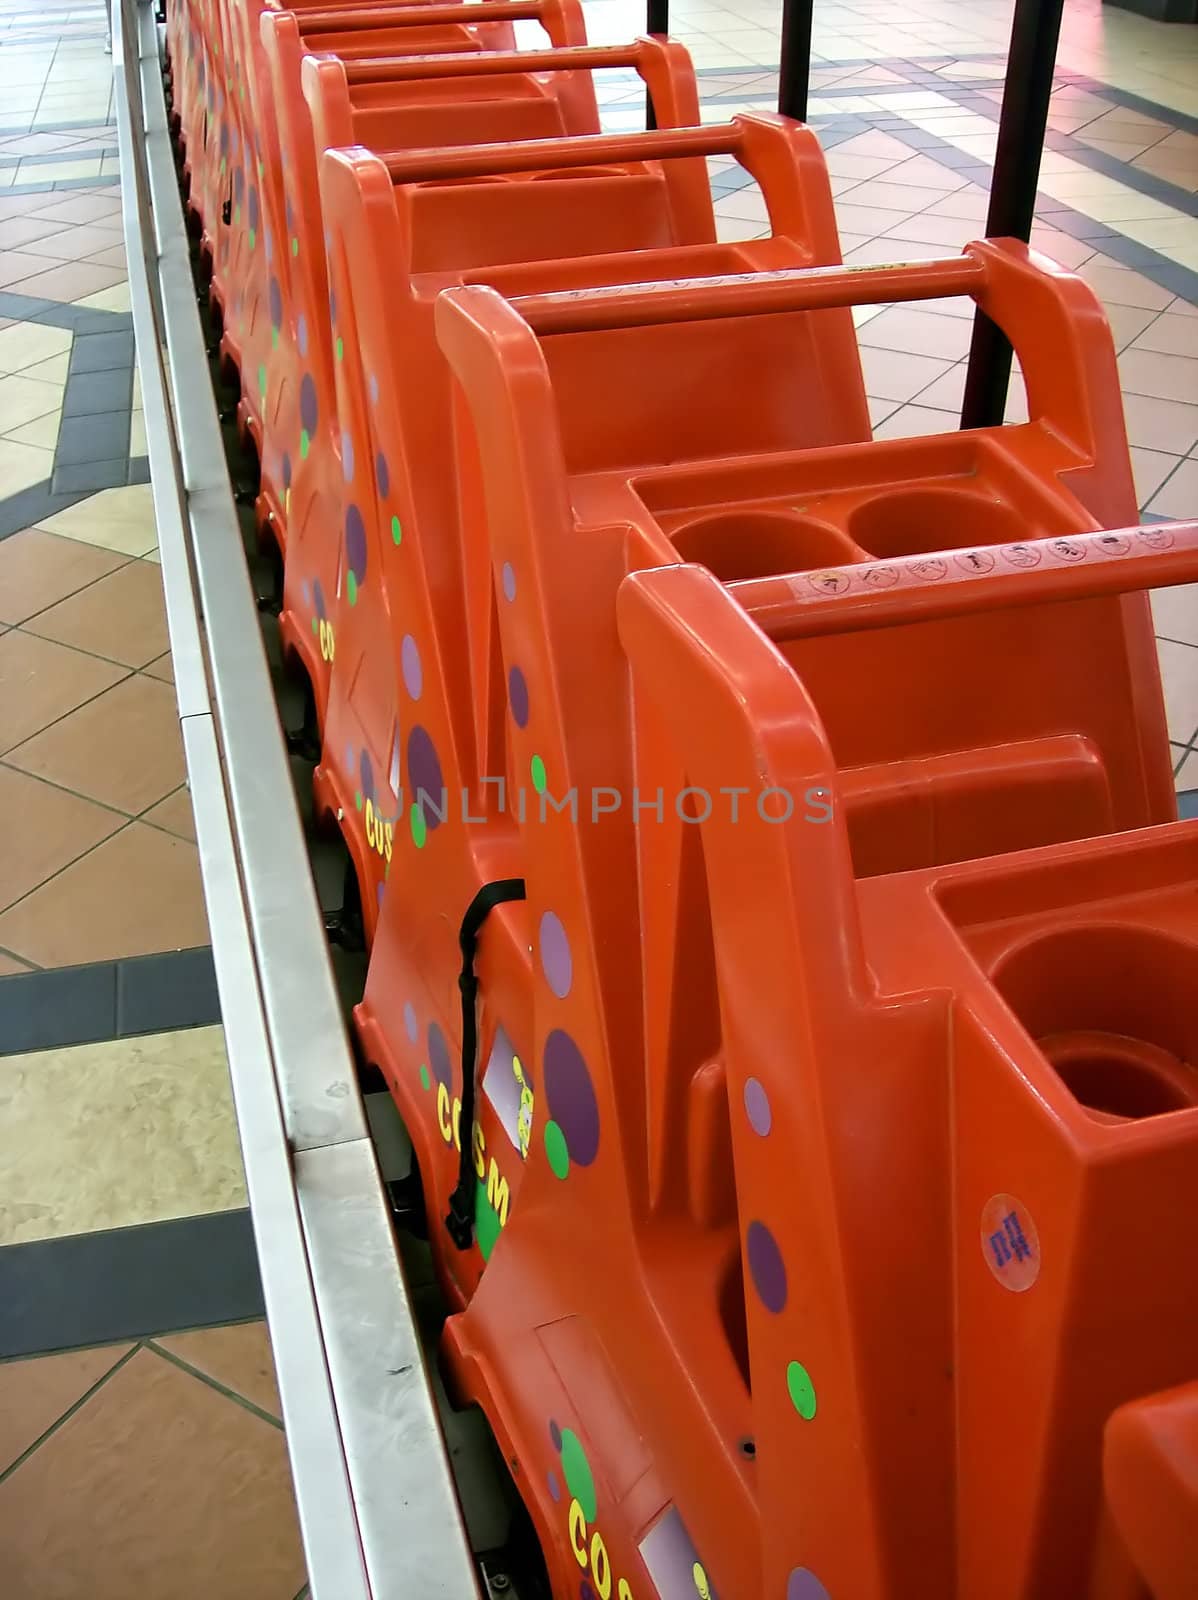 Child carts waiting for hire in a shopping mall.